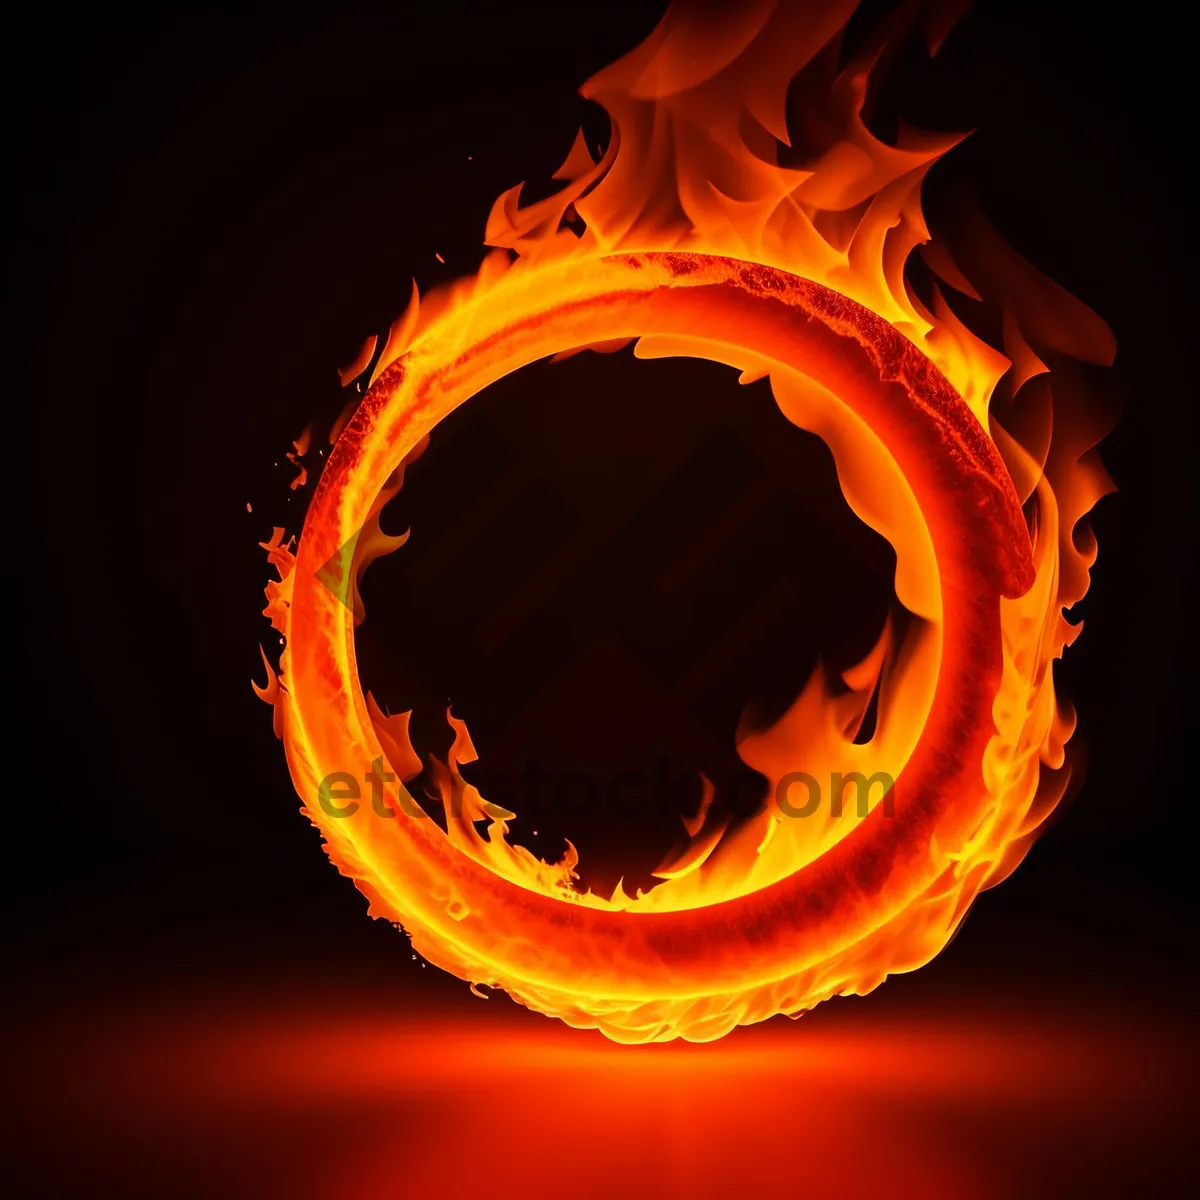 Picture of Blazing Heat - the Art of Fire